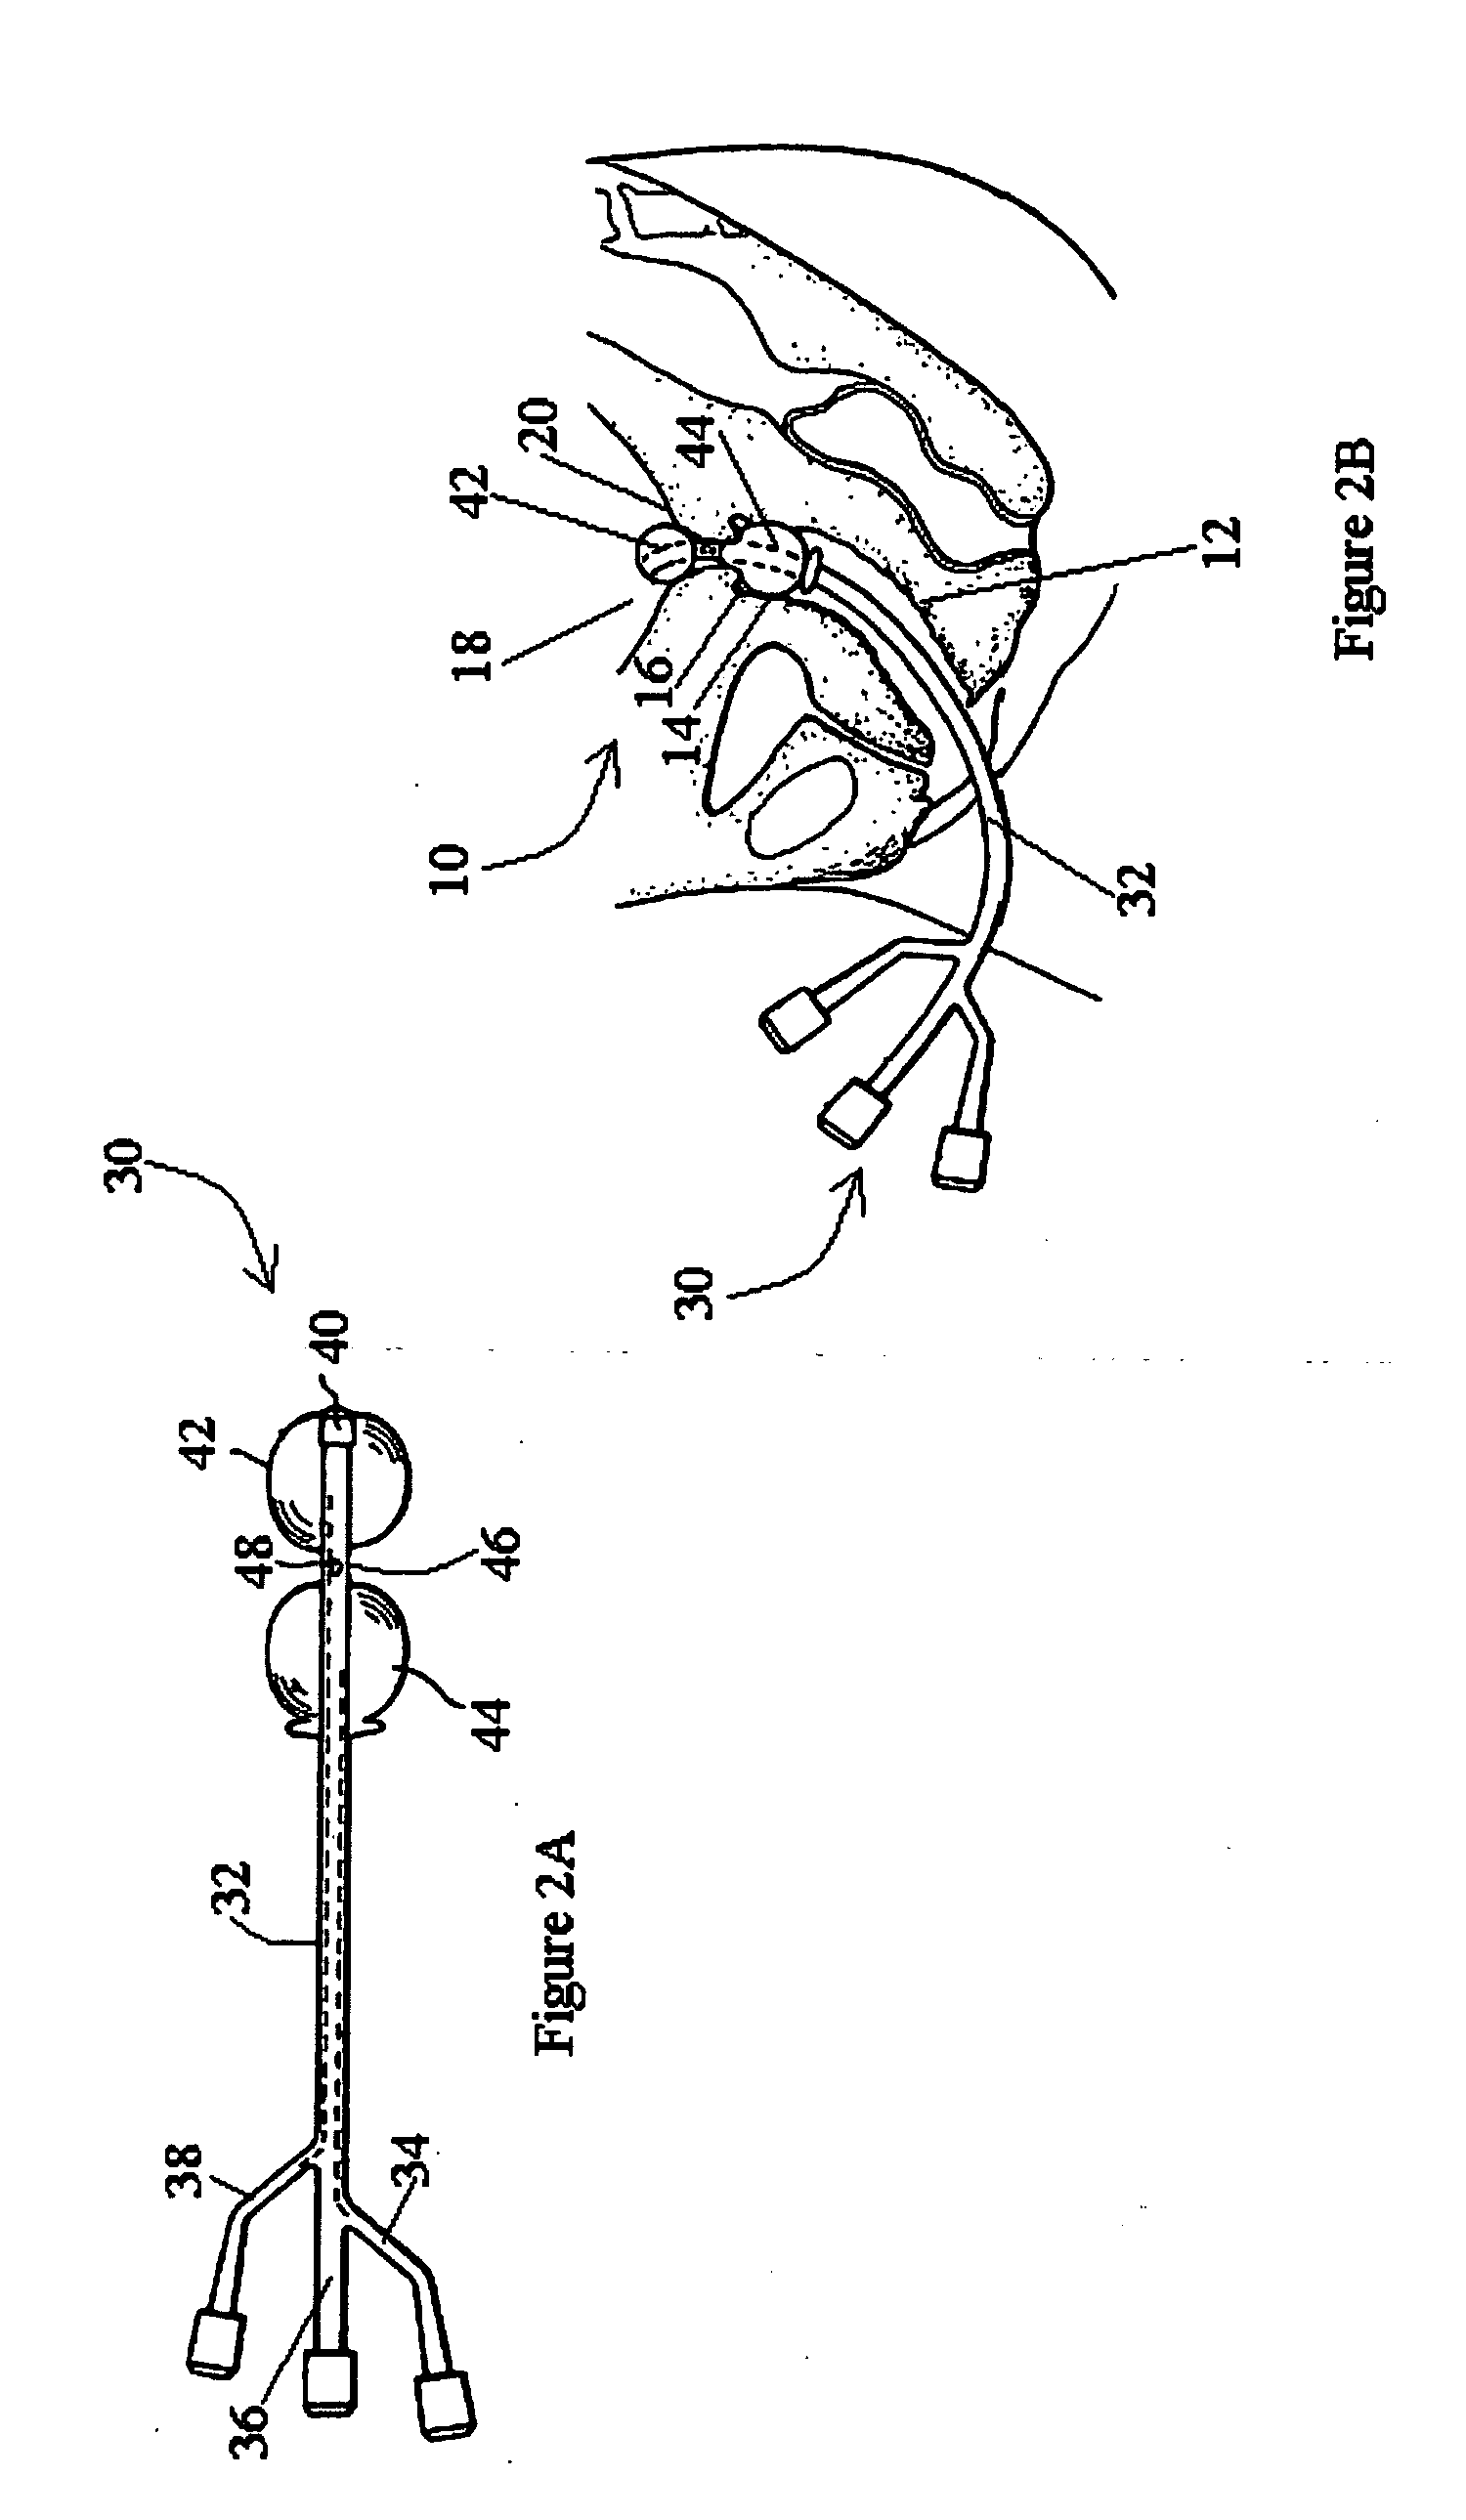 Inflatable system for cervical dilation and labor induction